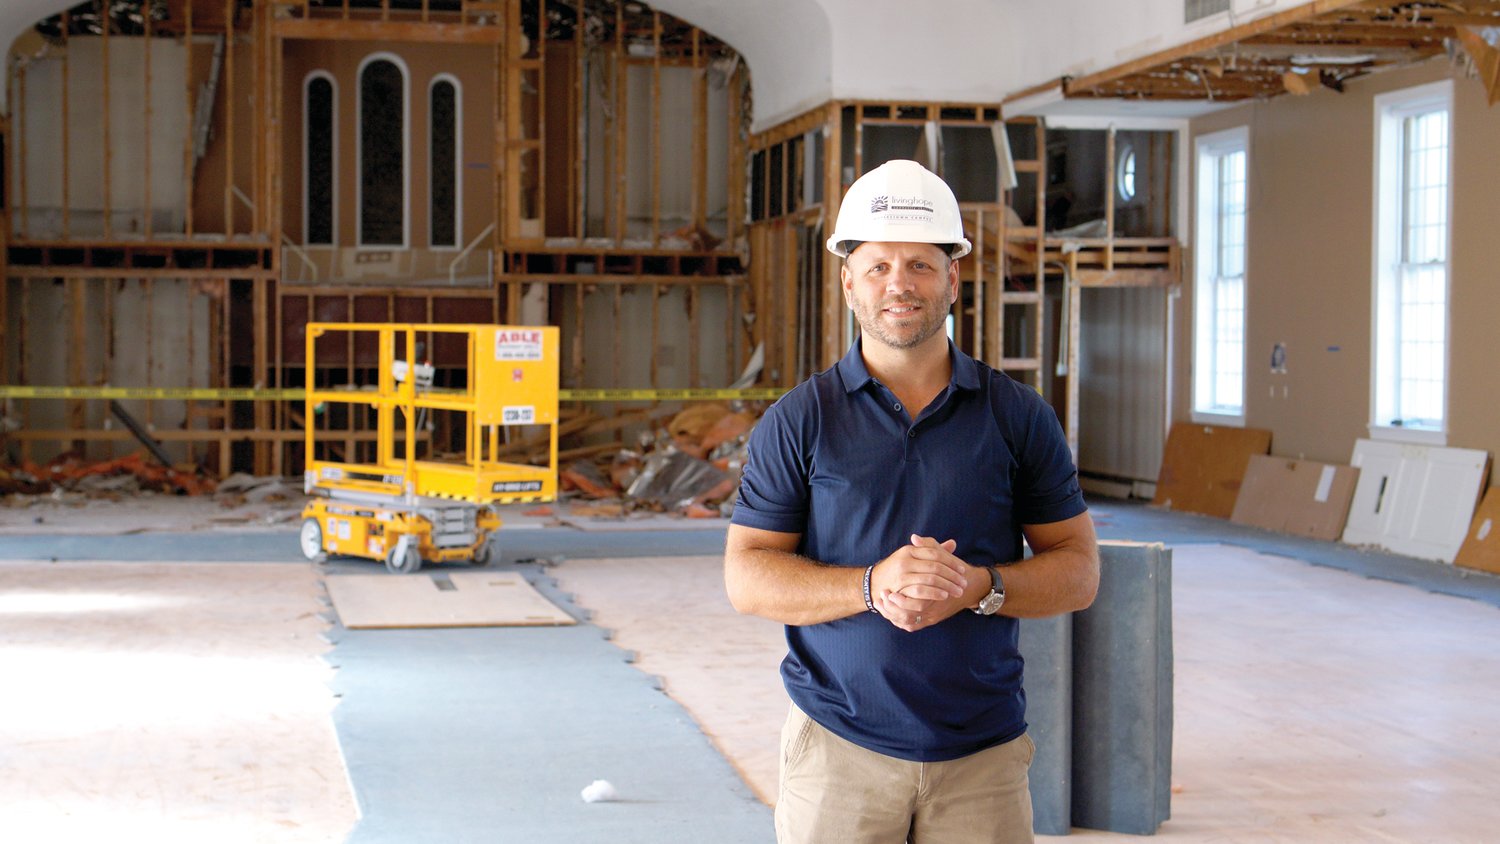 The Rev. Titus Buck joined the Living Hope staff in 2022 and will be the new pastor at the Doylestown campus, where construction has been taking place, to ready the church for its March 5 opening.